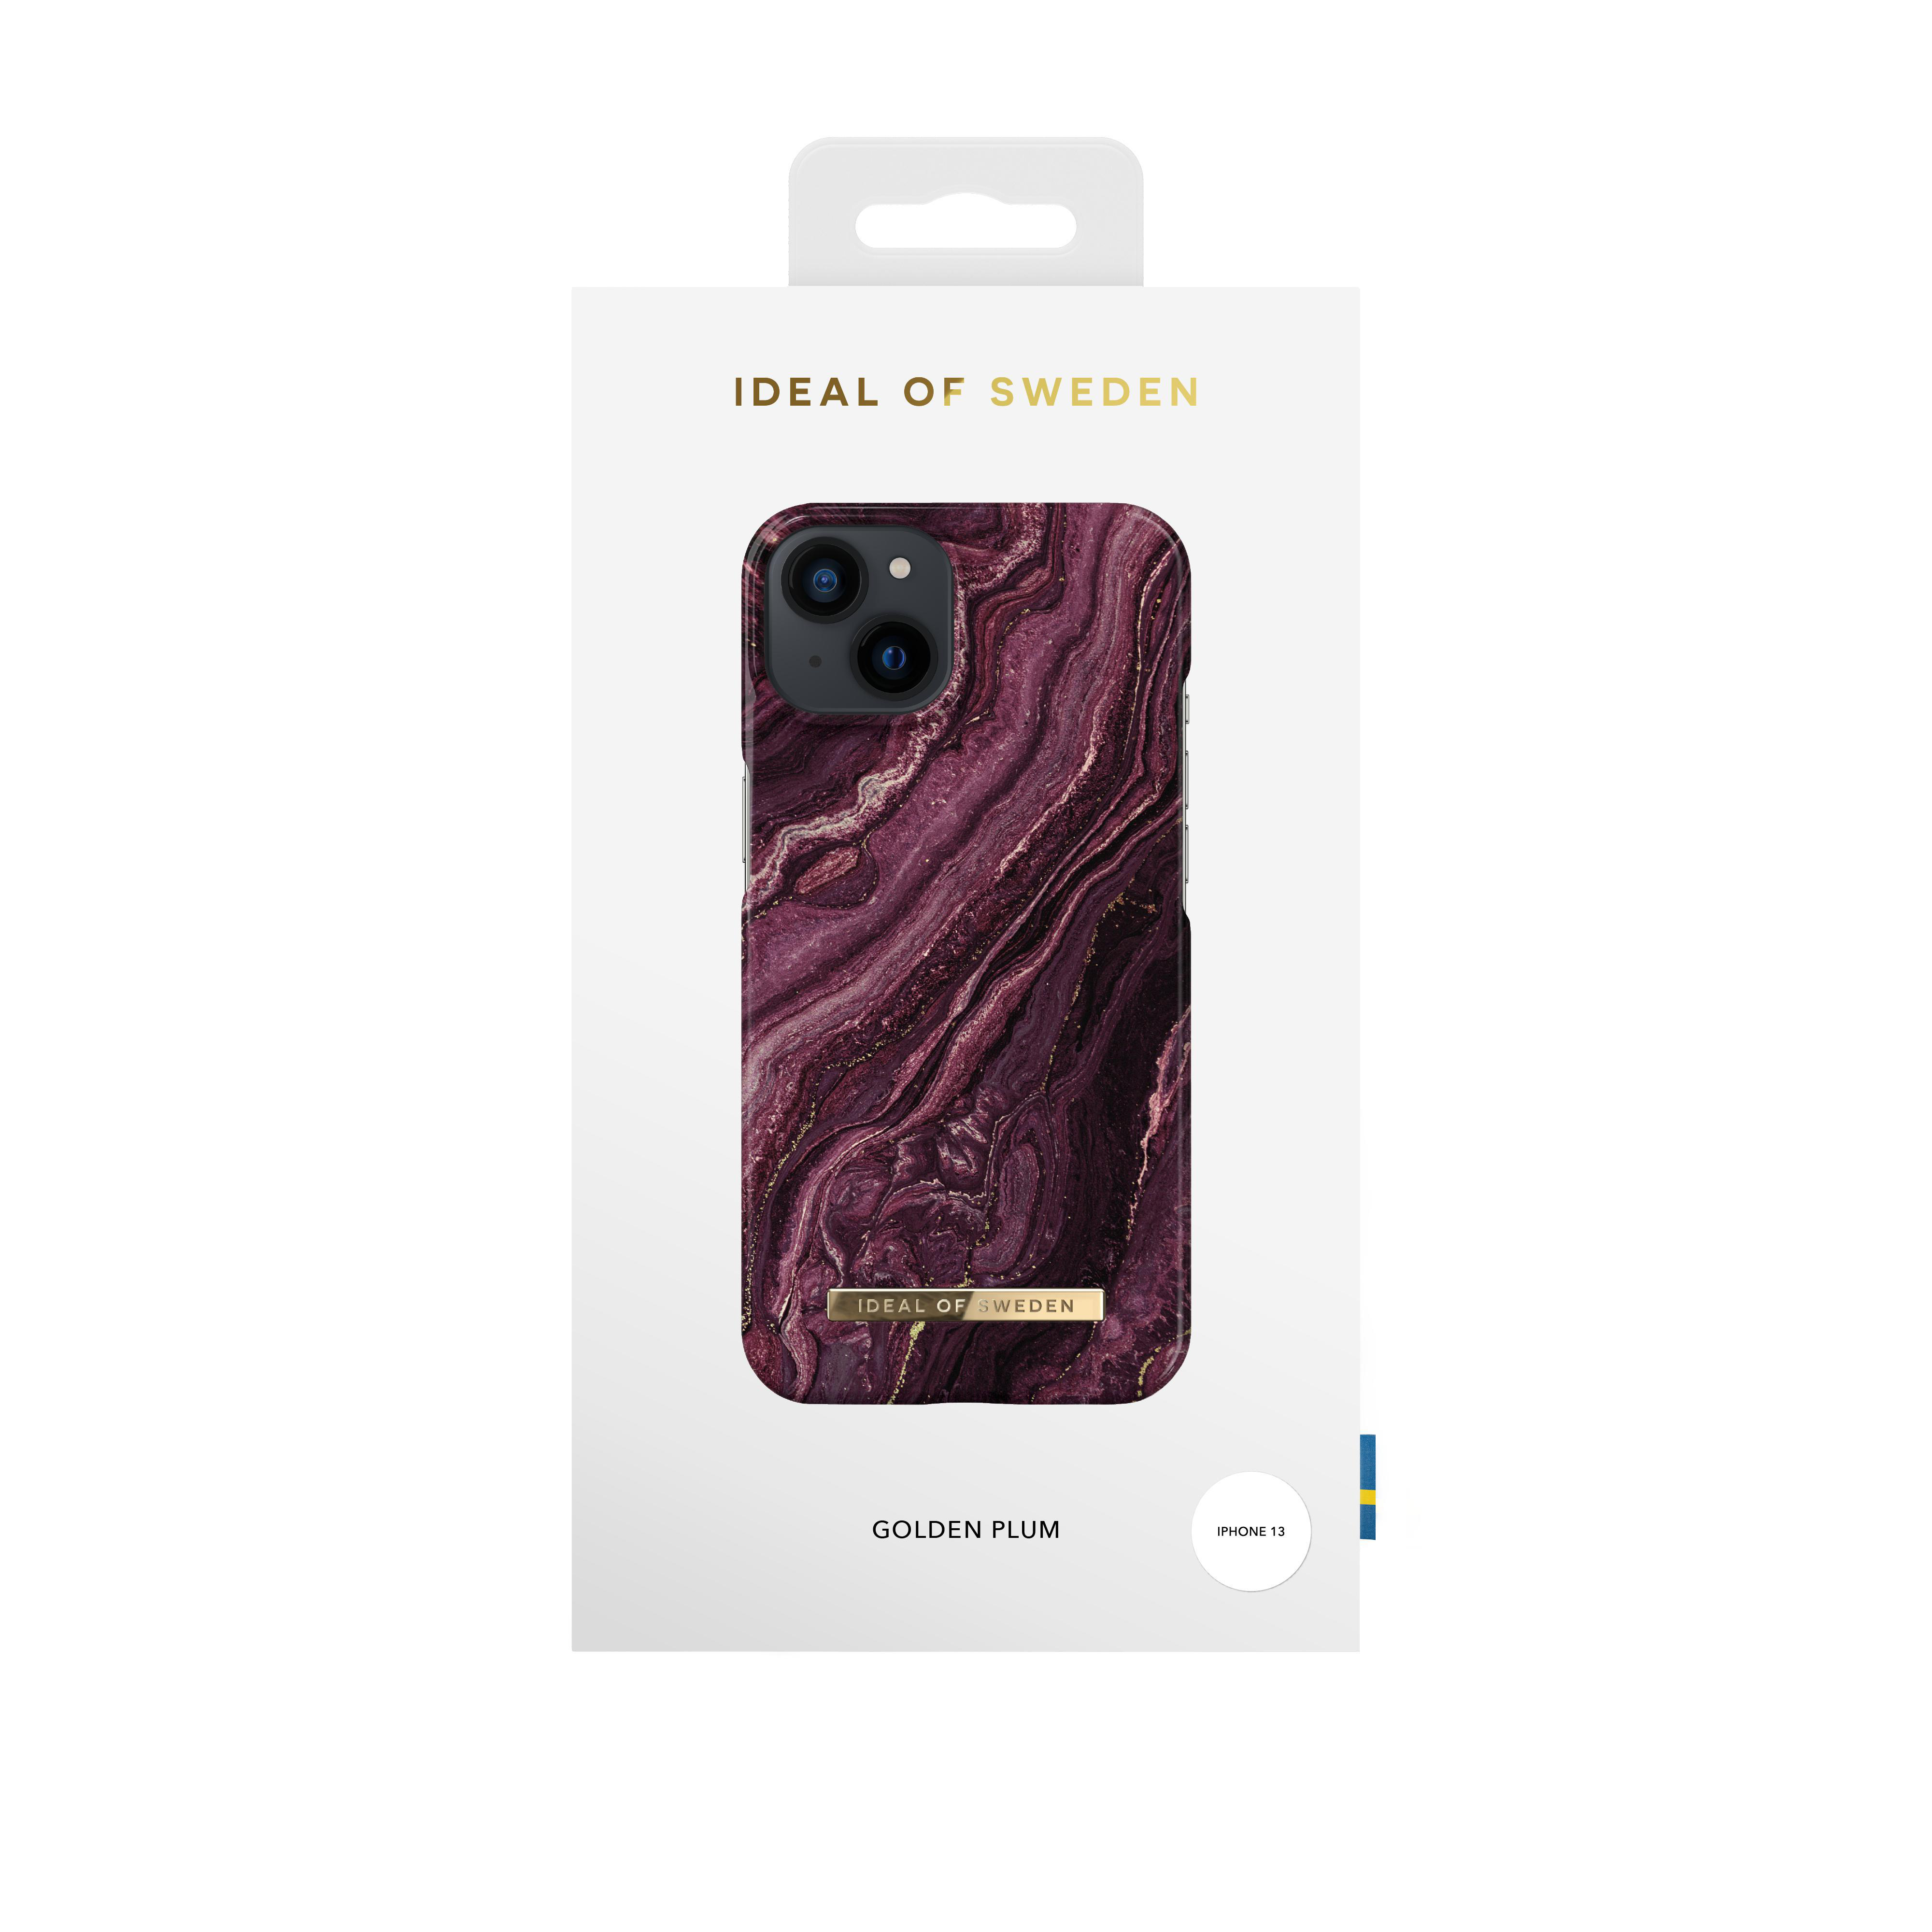 Backcover, Golden Apple, 13, OF iPhone Plum Fashion SWEDEN IDEAL Case,